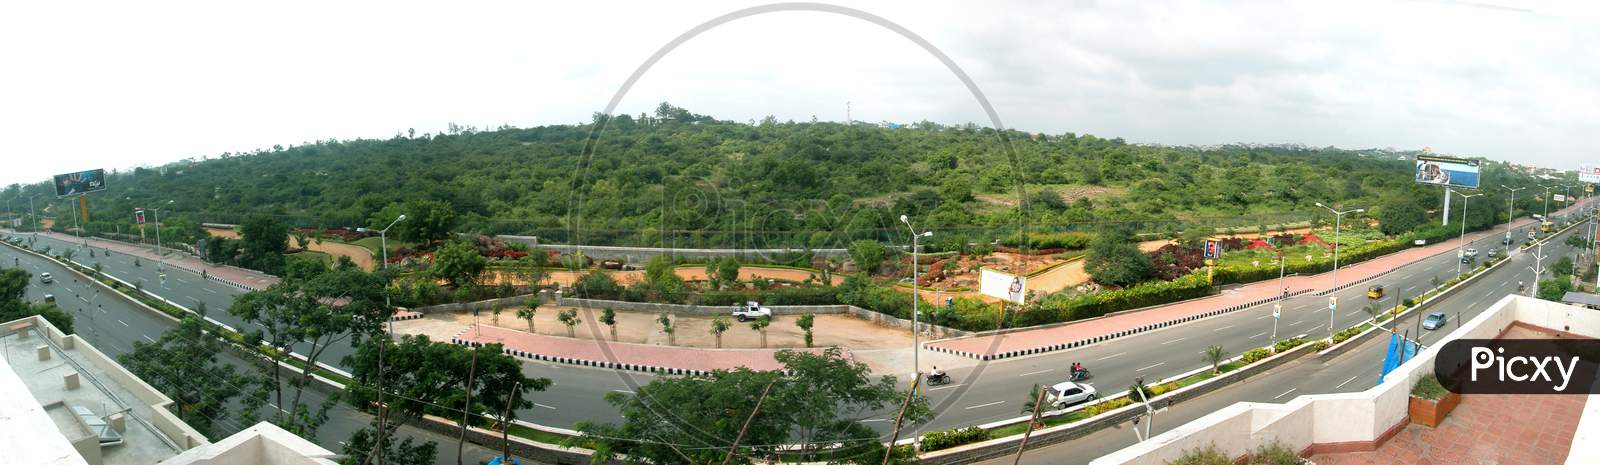 Kbr Park Panorama From Jubilee Hills Road-Hyderabad